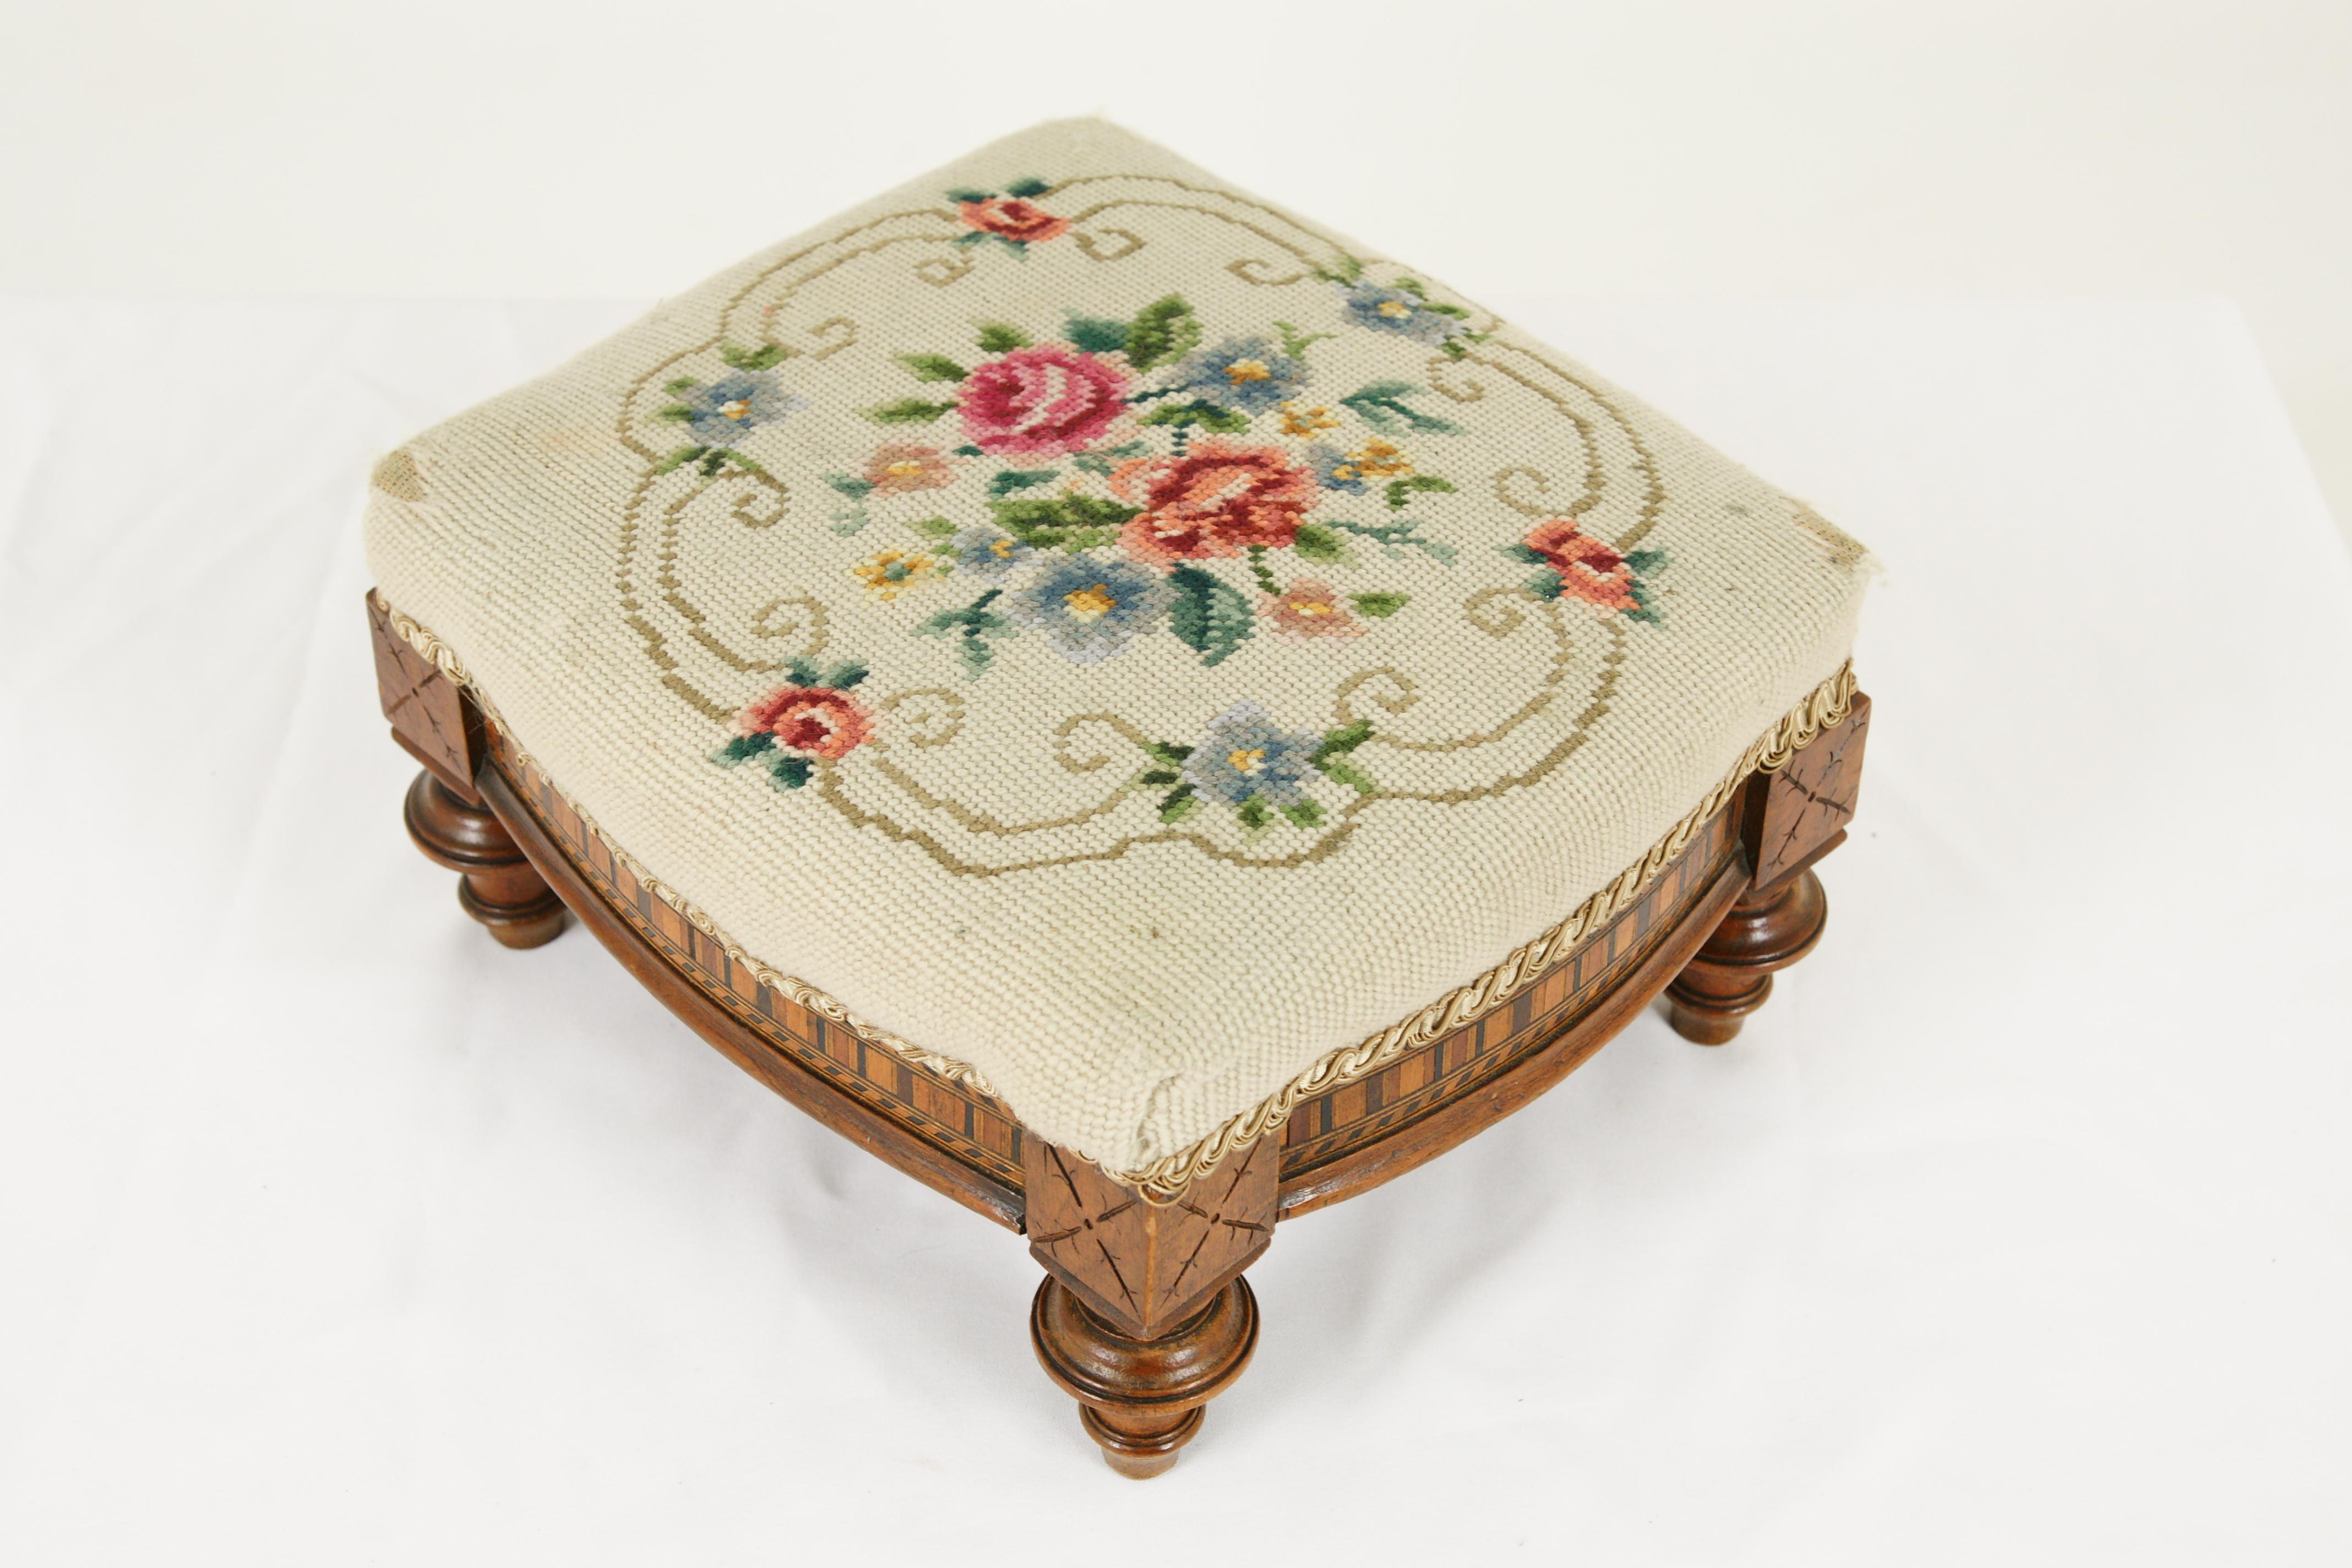 Hand-Crafted Antique Embroidered Footstool, Needlepoint, Victorian, Scotland 1880, B1733